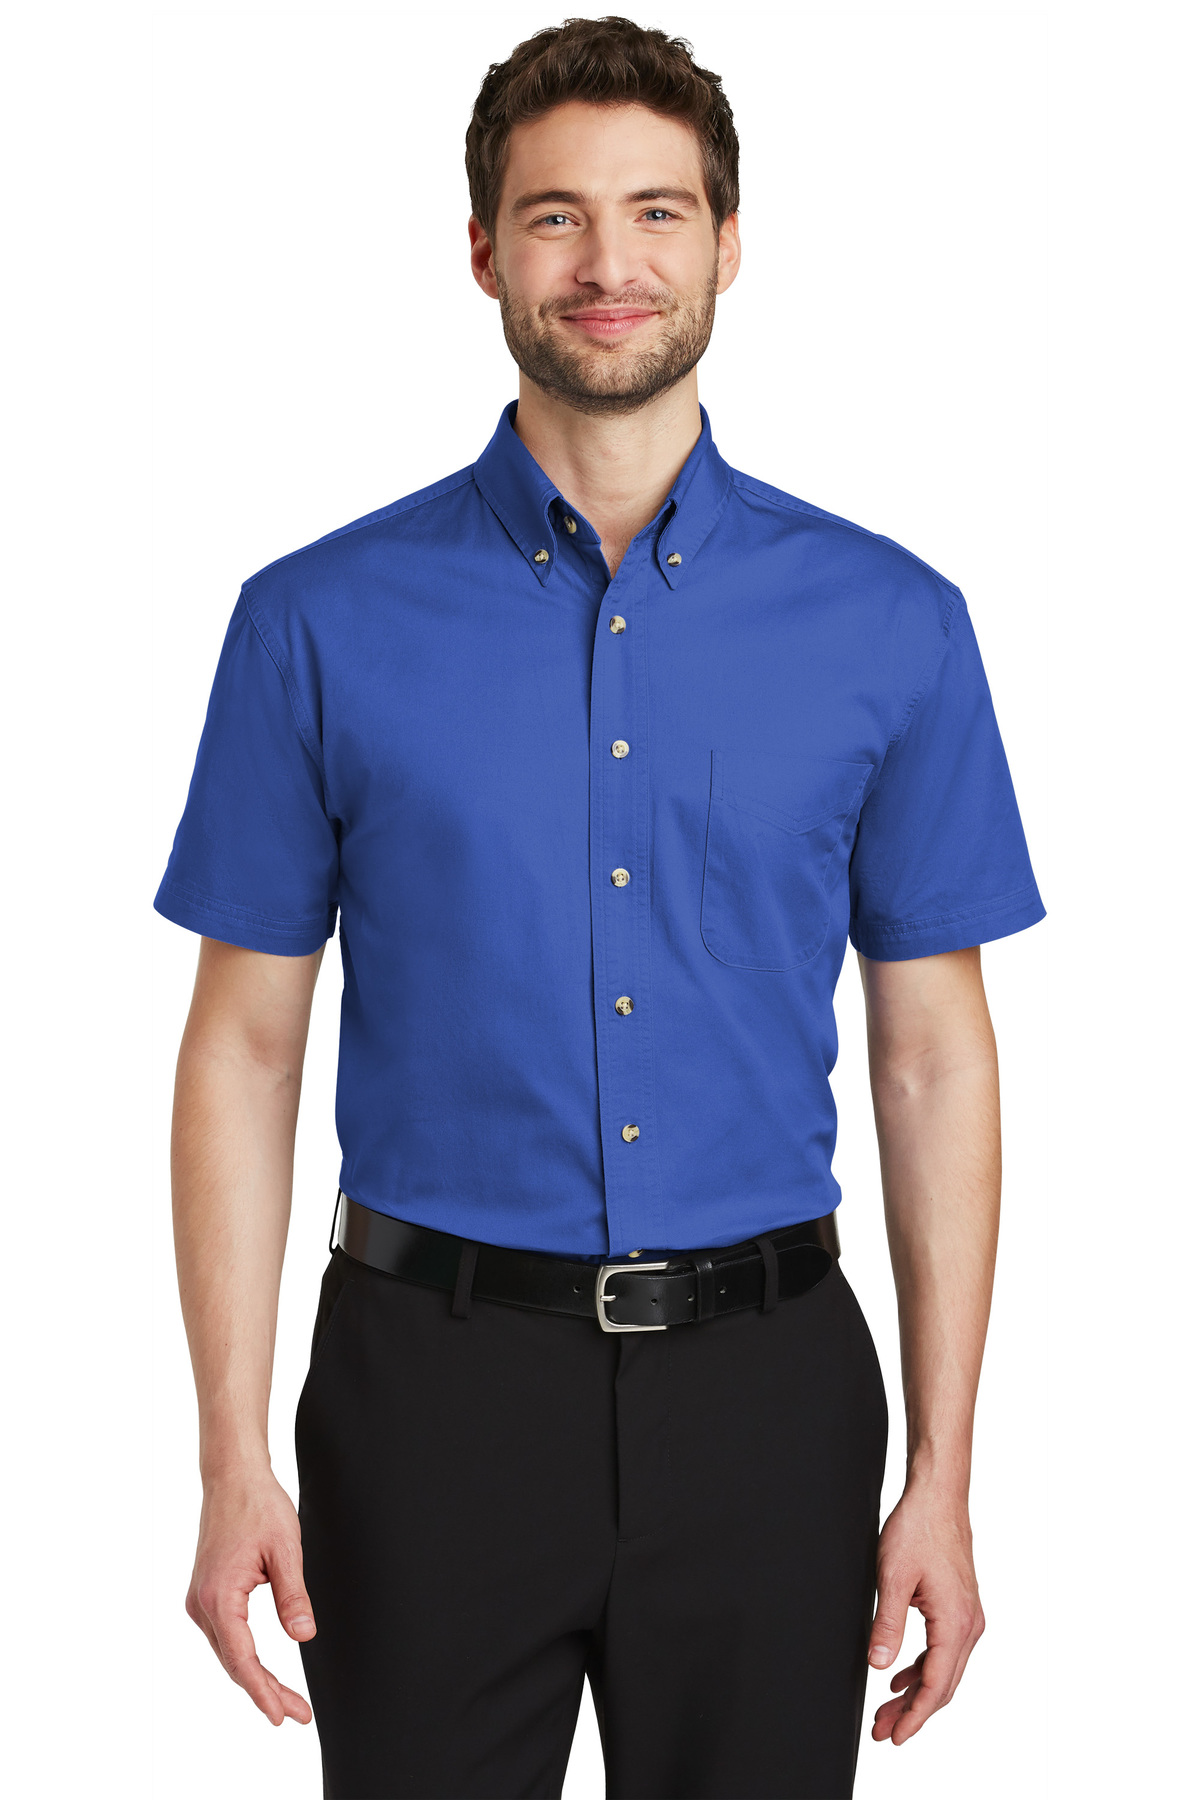 Port Authority Short Sleeve Twill Shirt | Product | Company Casuals